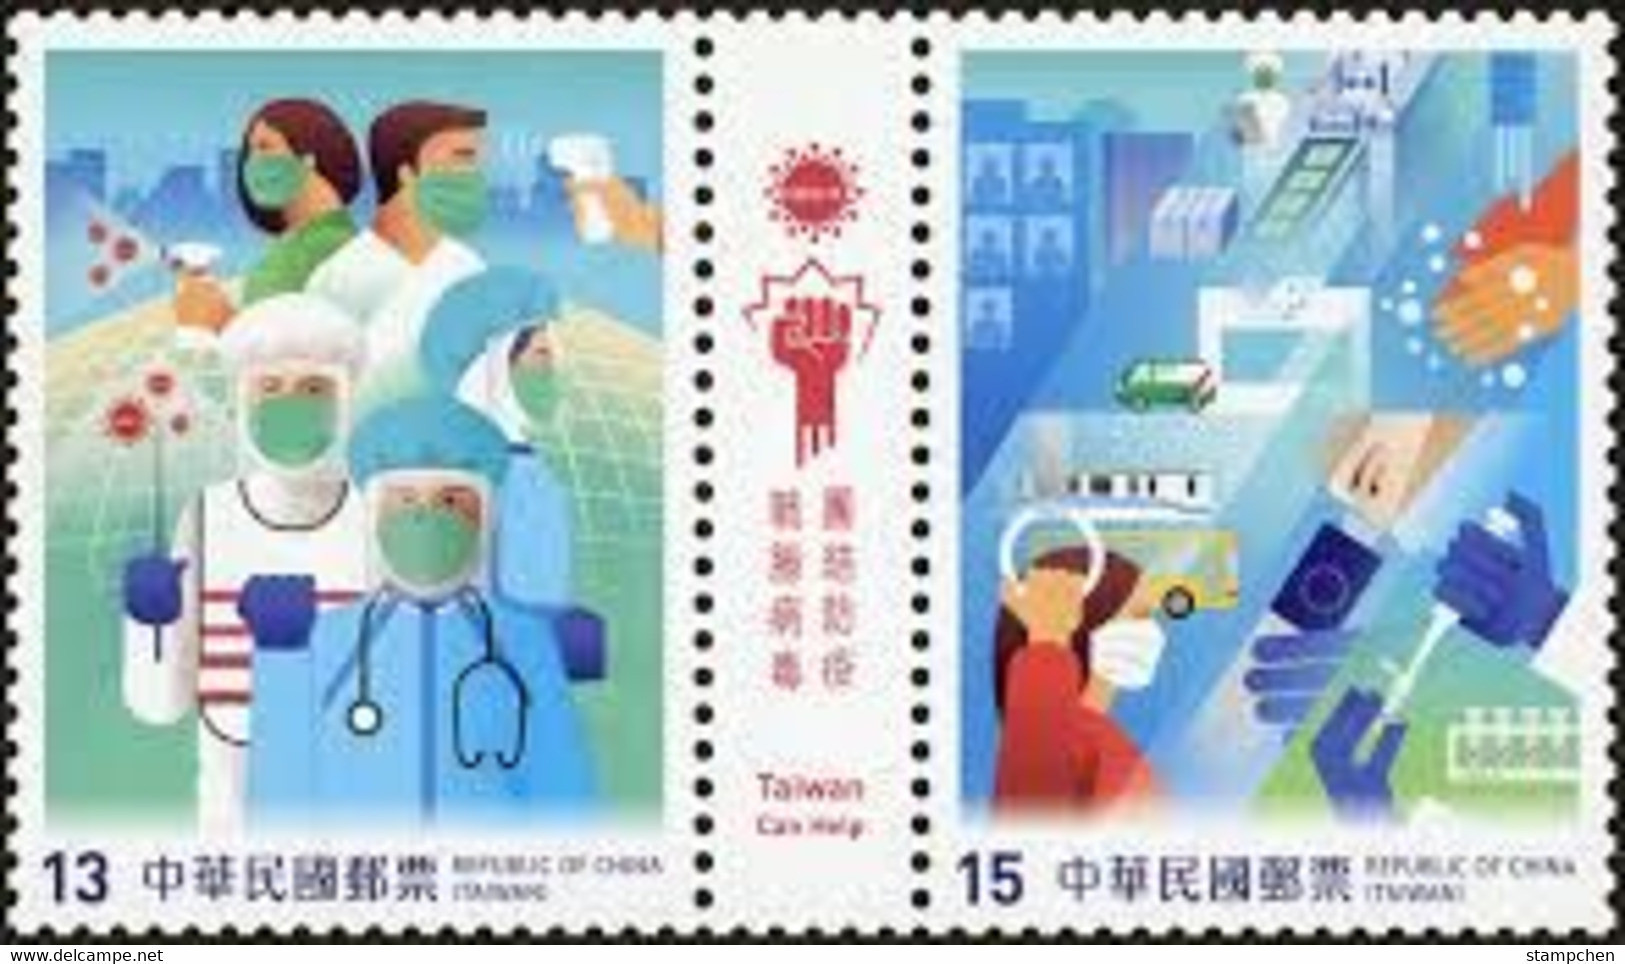 Taiwan 2020 COVID-19 Prevention Stamps Mask Doctor Nurse Ambulance MRT Train - Unused Stamps